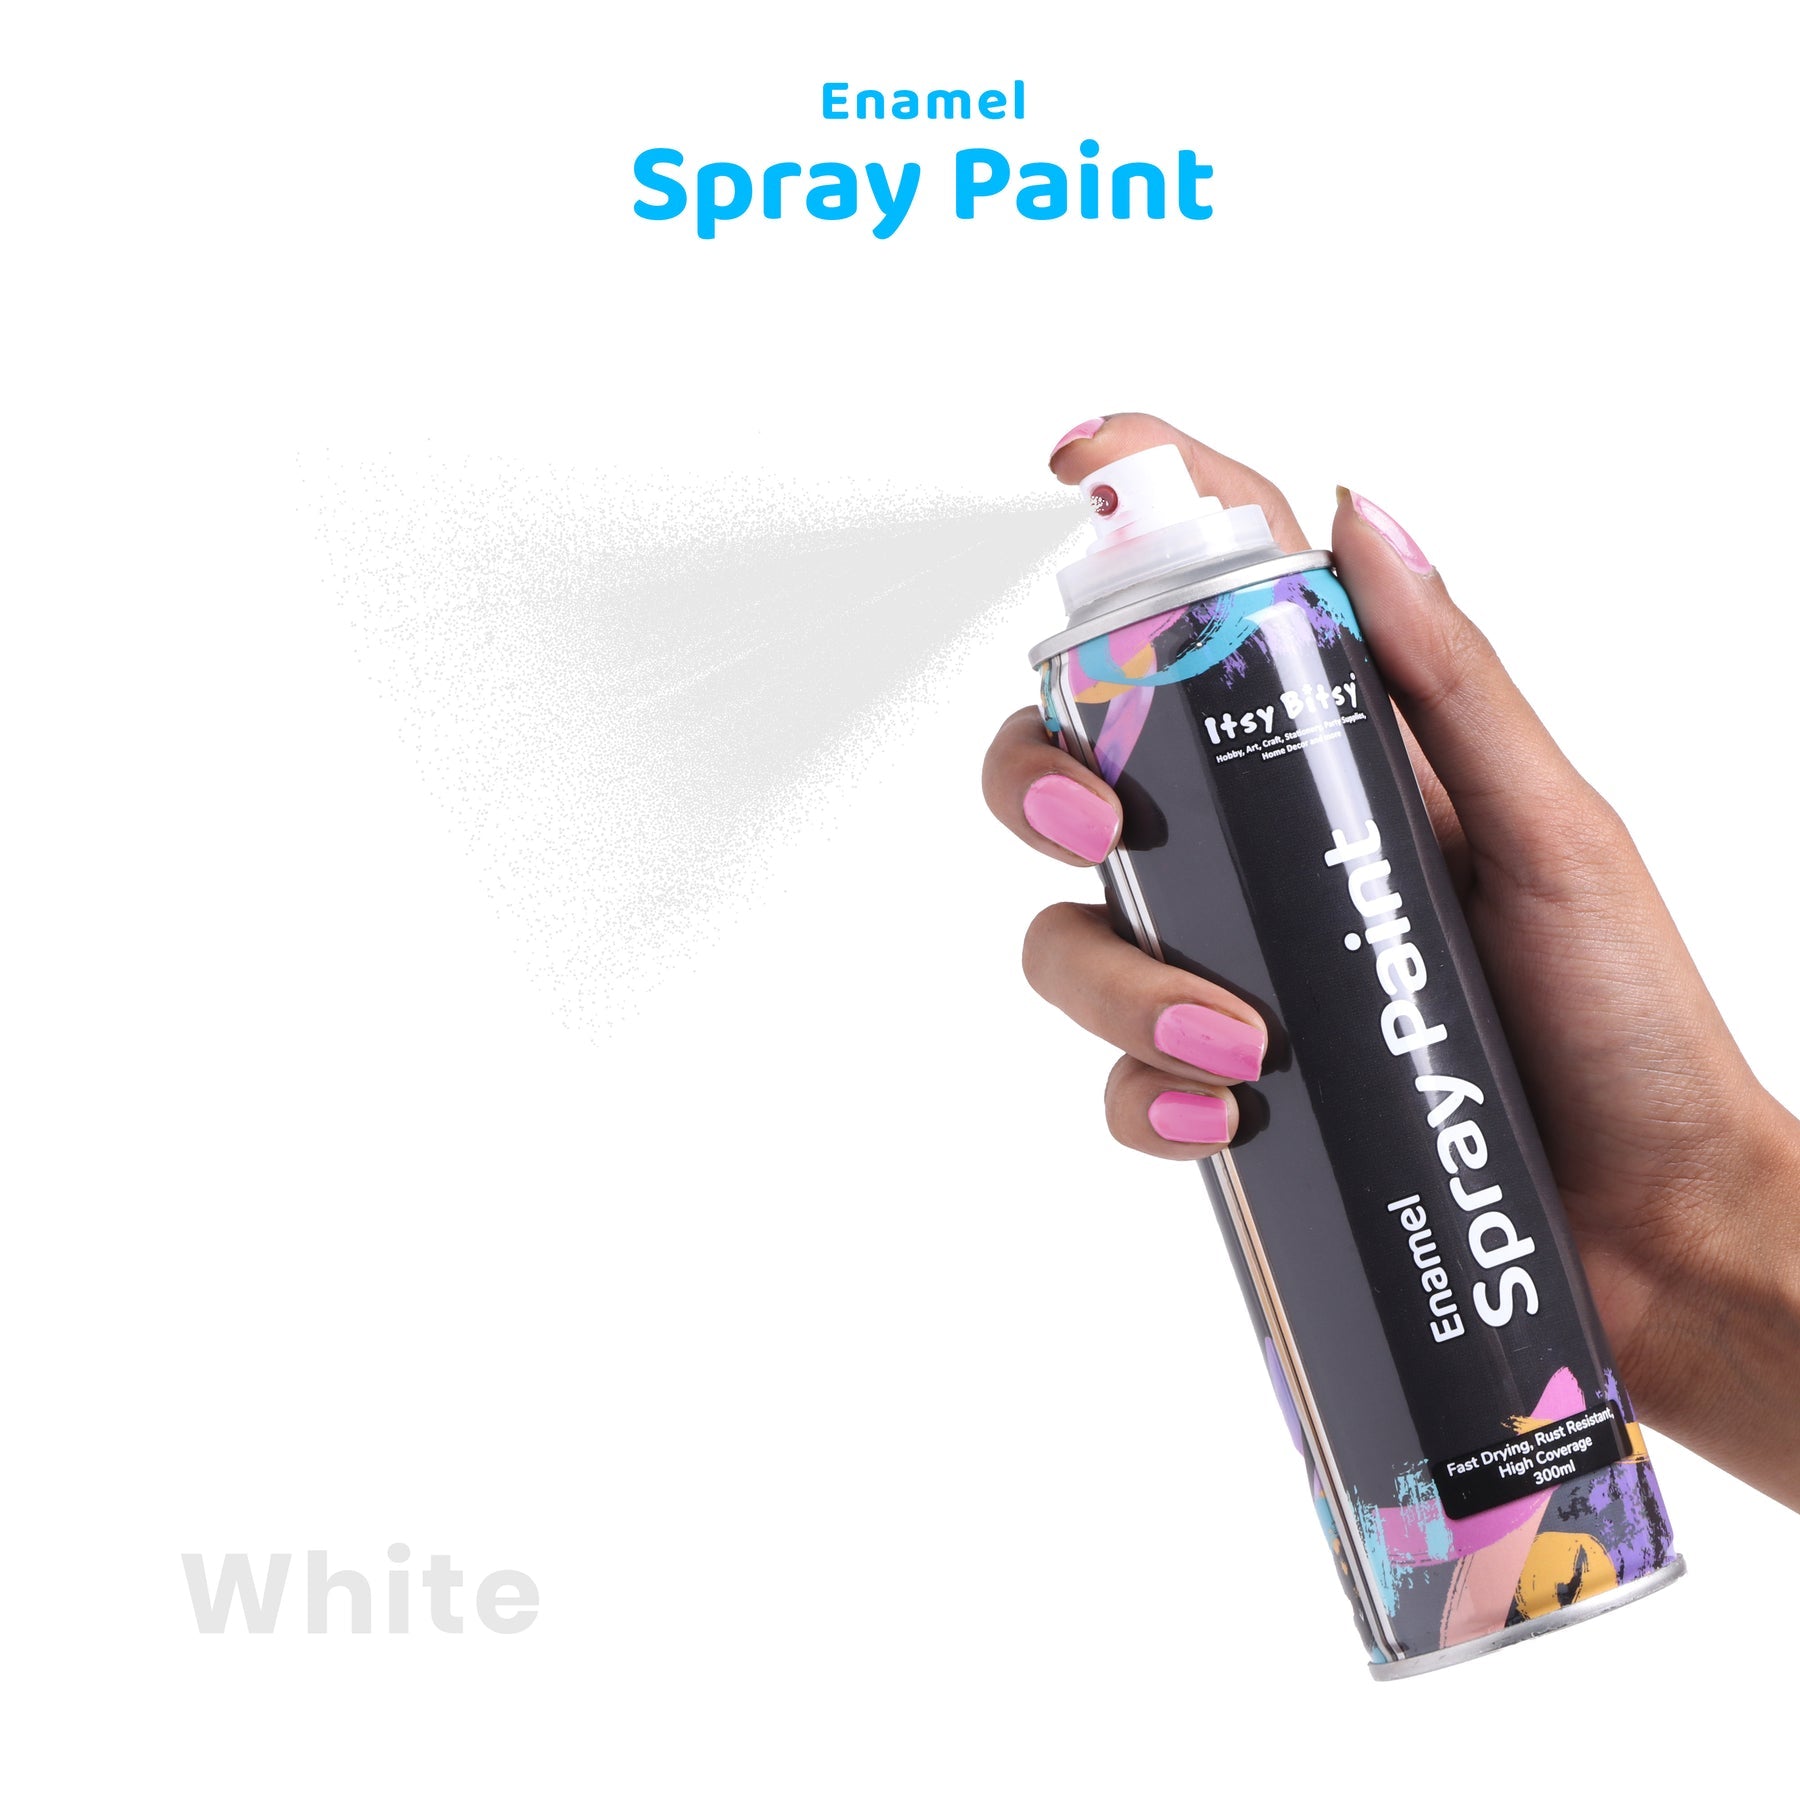 Spray Paint Metallic Glossy Black And White Value Pack Combo - 300ml each